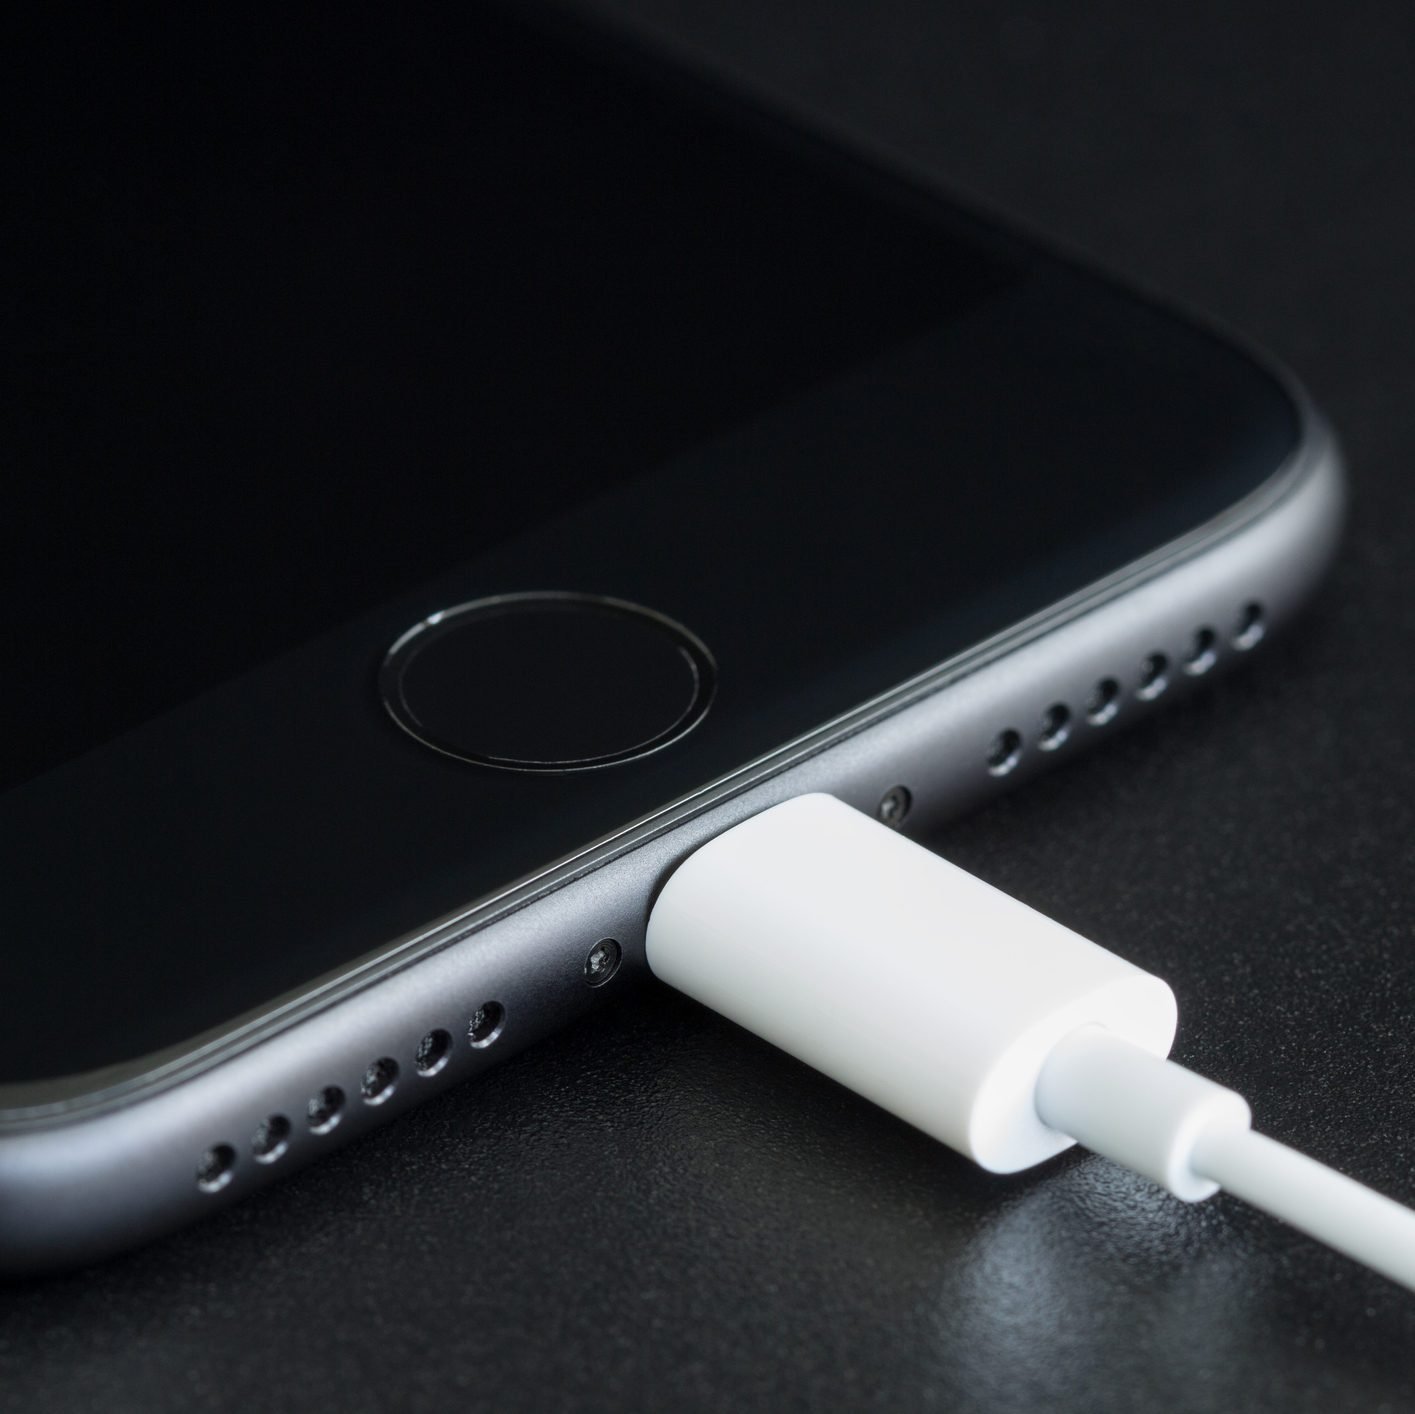 How to Clean Your iPhoneâs Charging Port